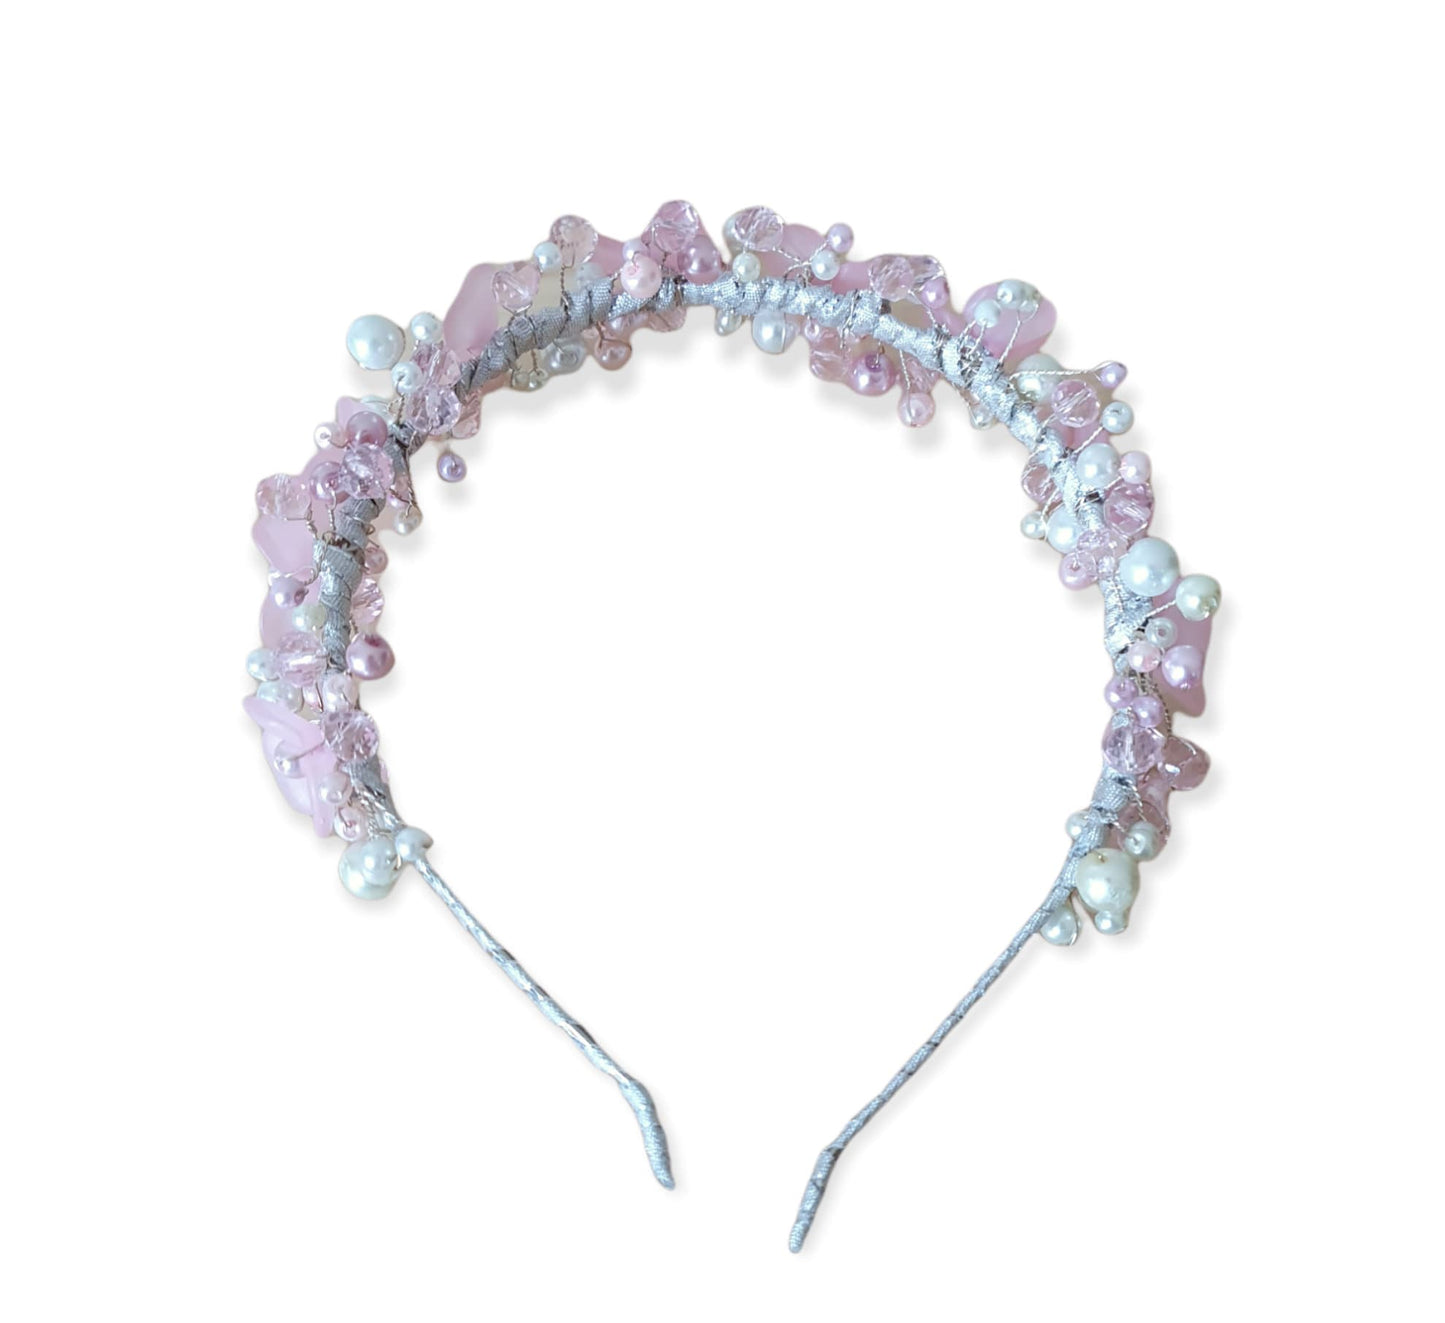 Handmade women's headband with plastic flowers, tiara, bridal diadem, hair accessories, guest tiara, special for events